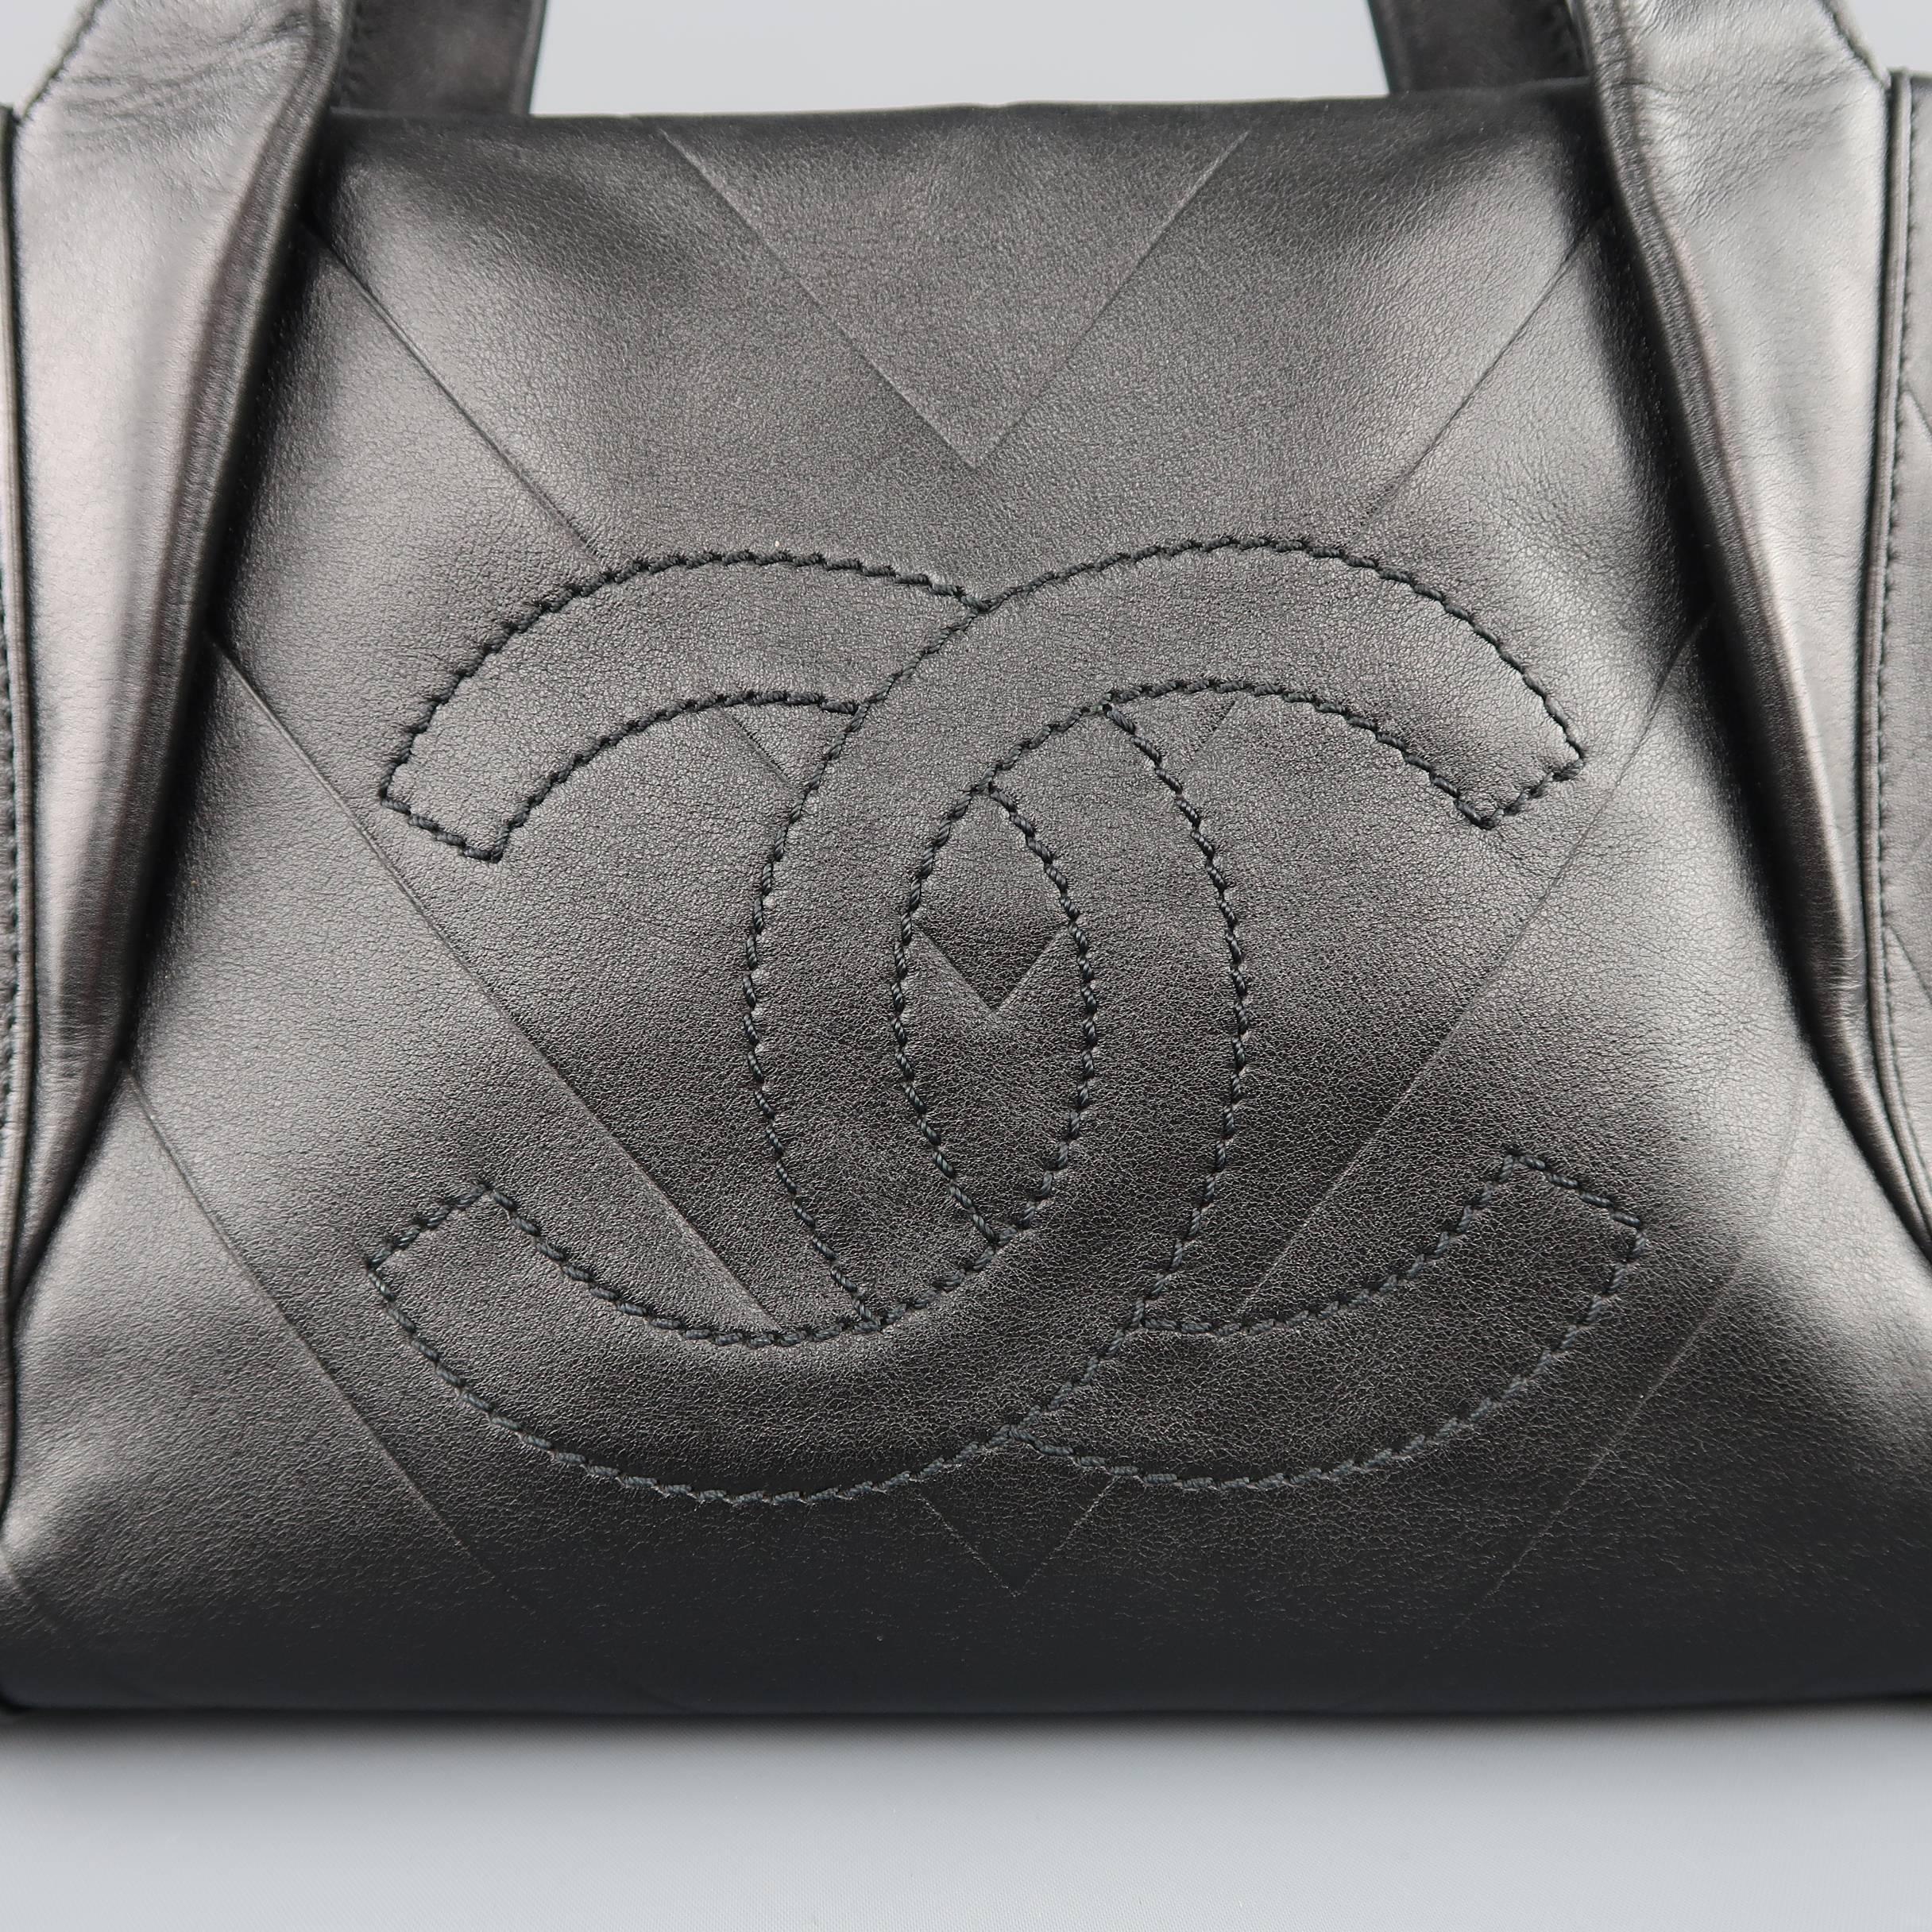 Chanel mini tote bag comes in chevron embossed leather with quilted embossed sides, oversized embroidered CC logo, double covered top handles with silver tone embossed studs, and zip closure. With Authentication cards. Made in Italy.
 
Excellent